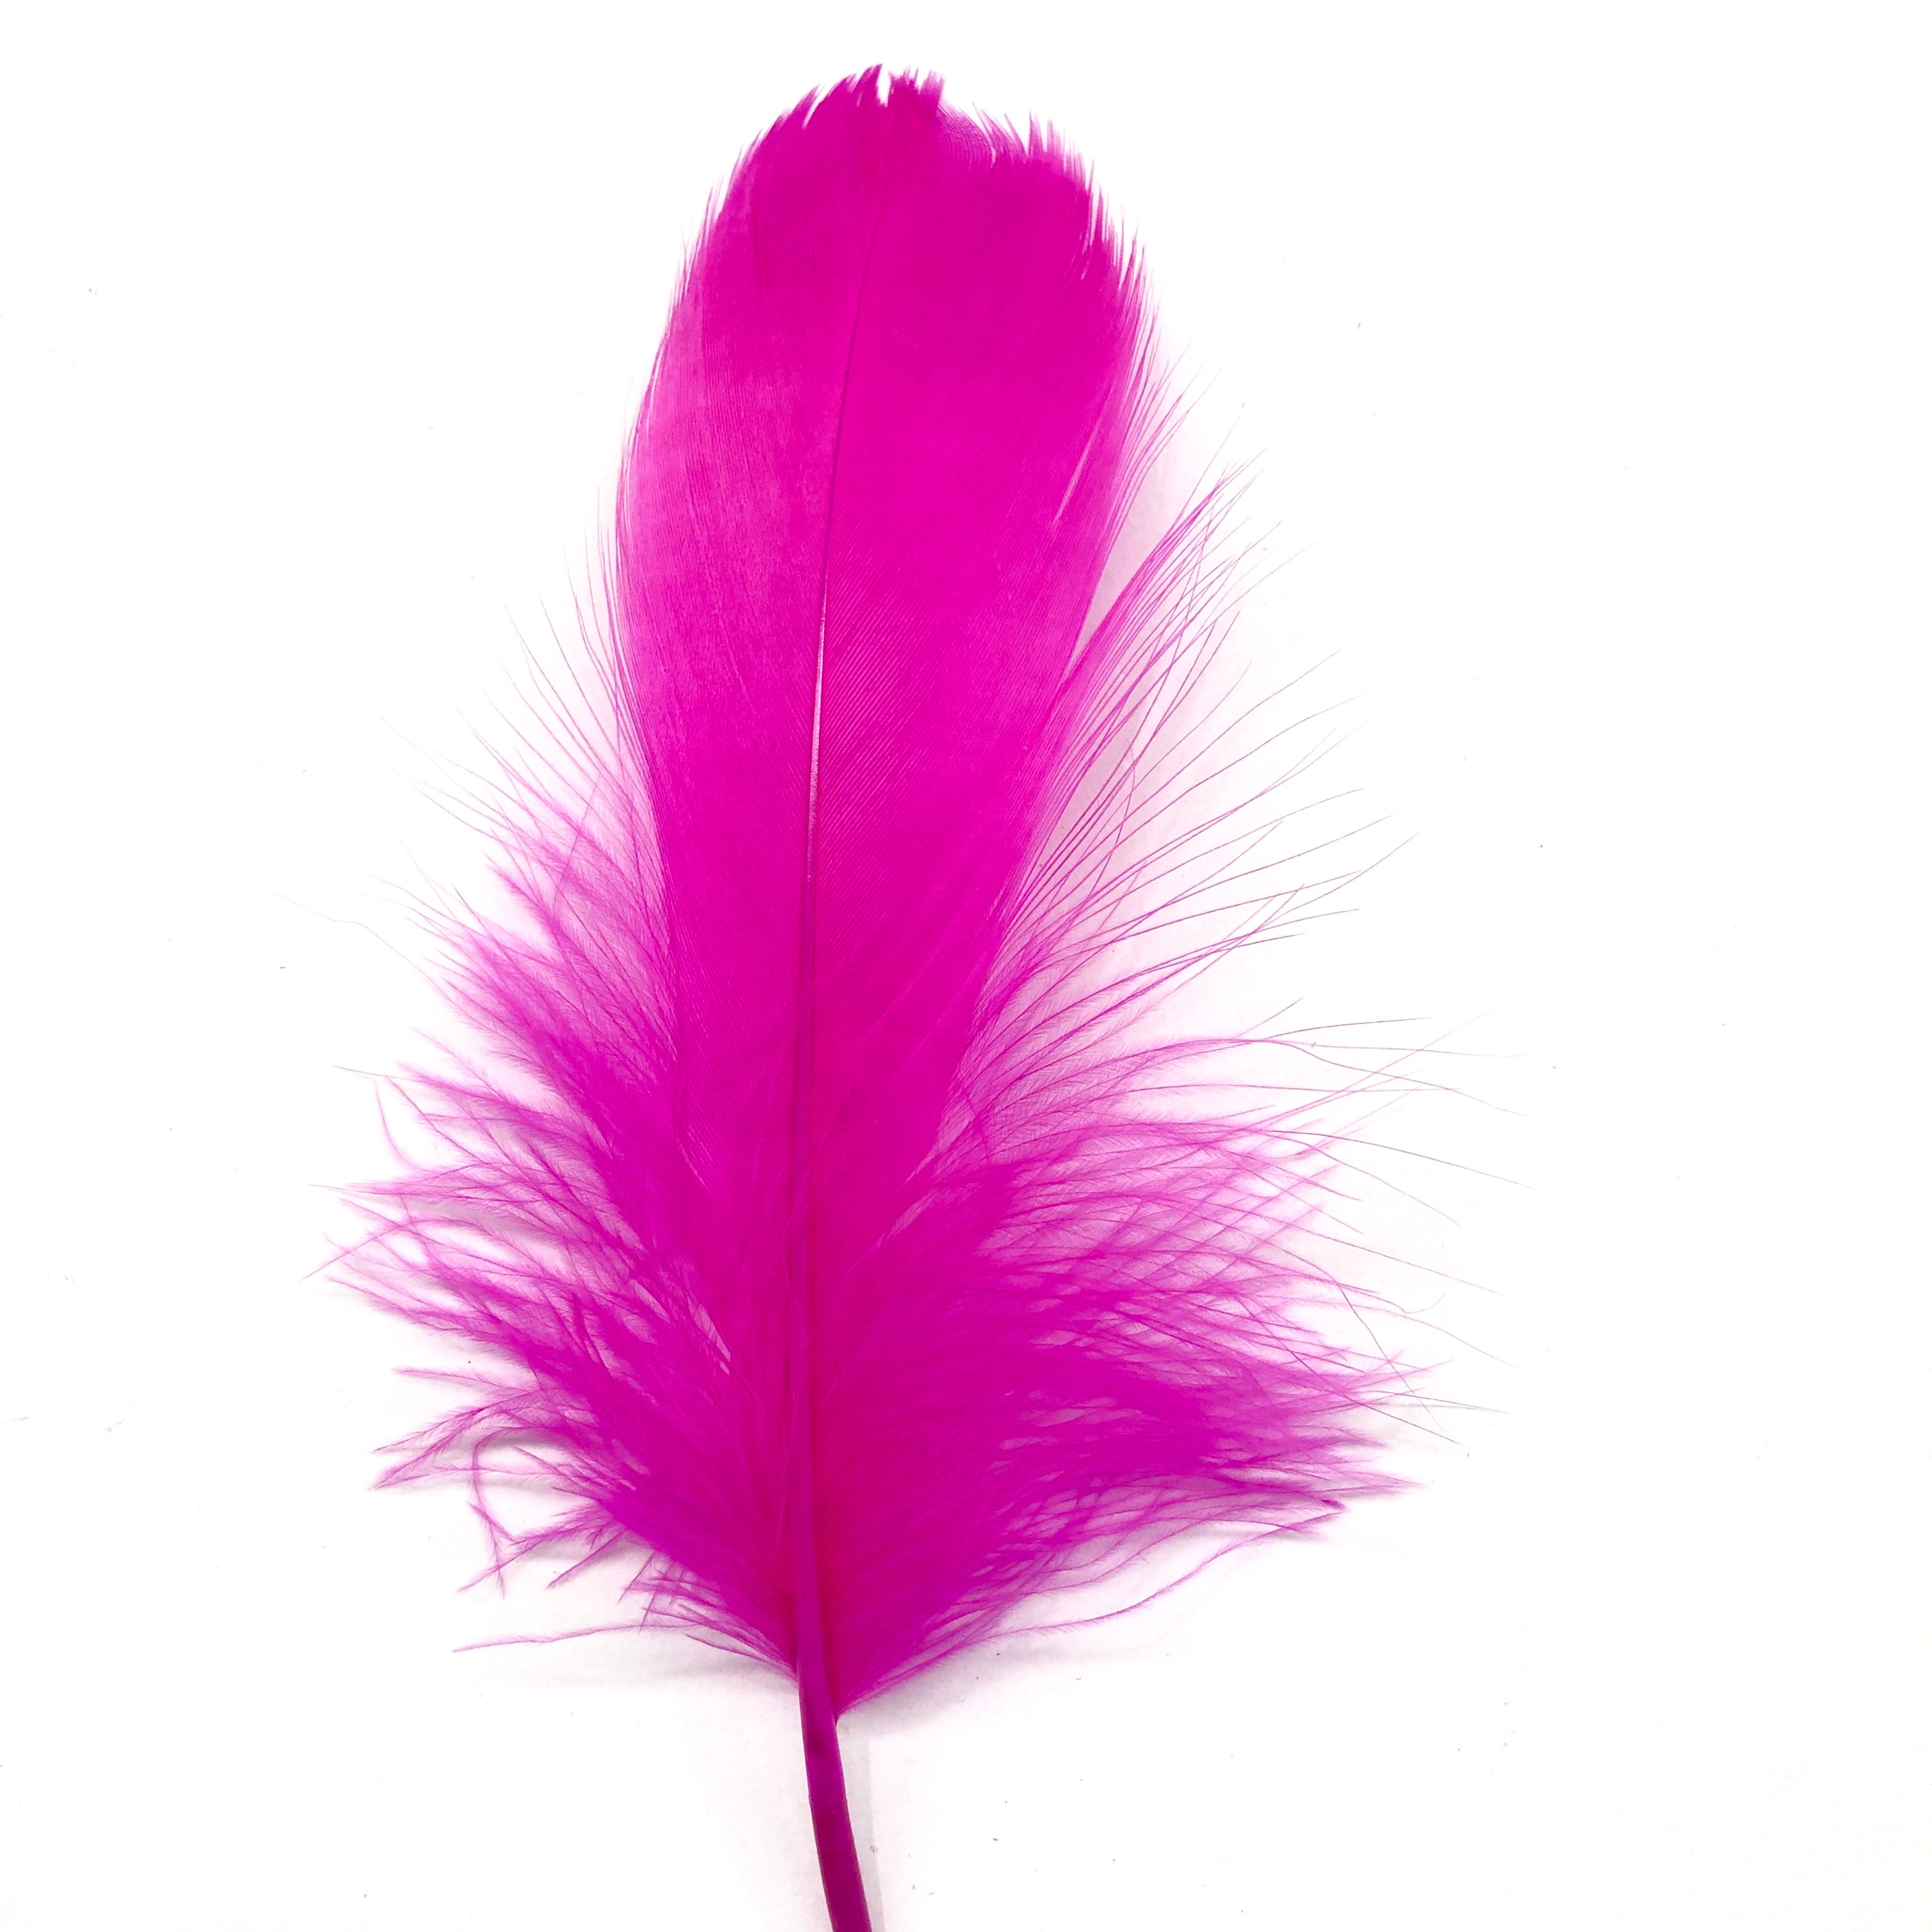 Goose Nagoire Feathers 10 grams - Cerise